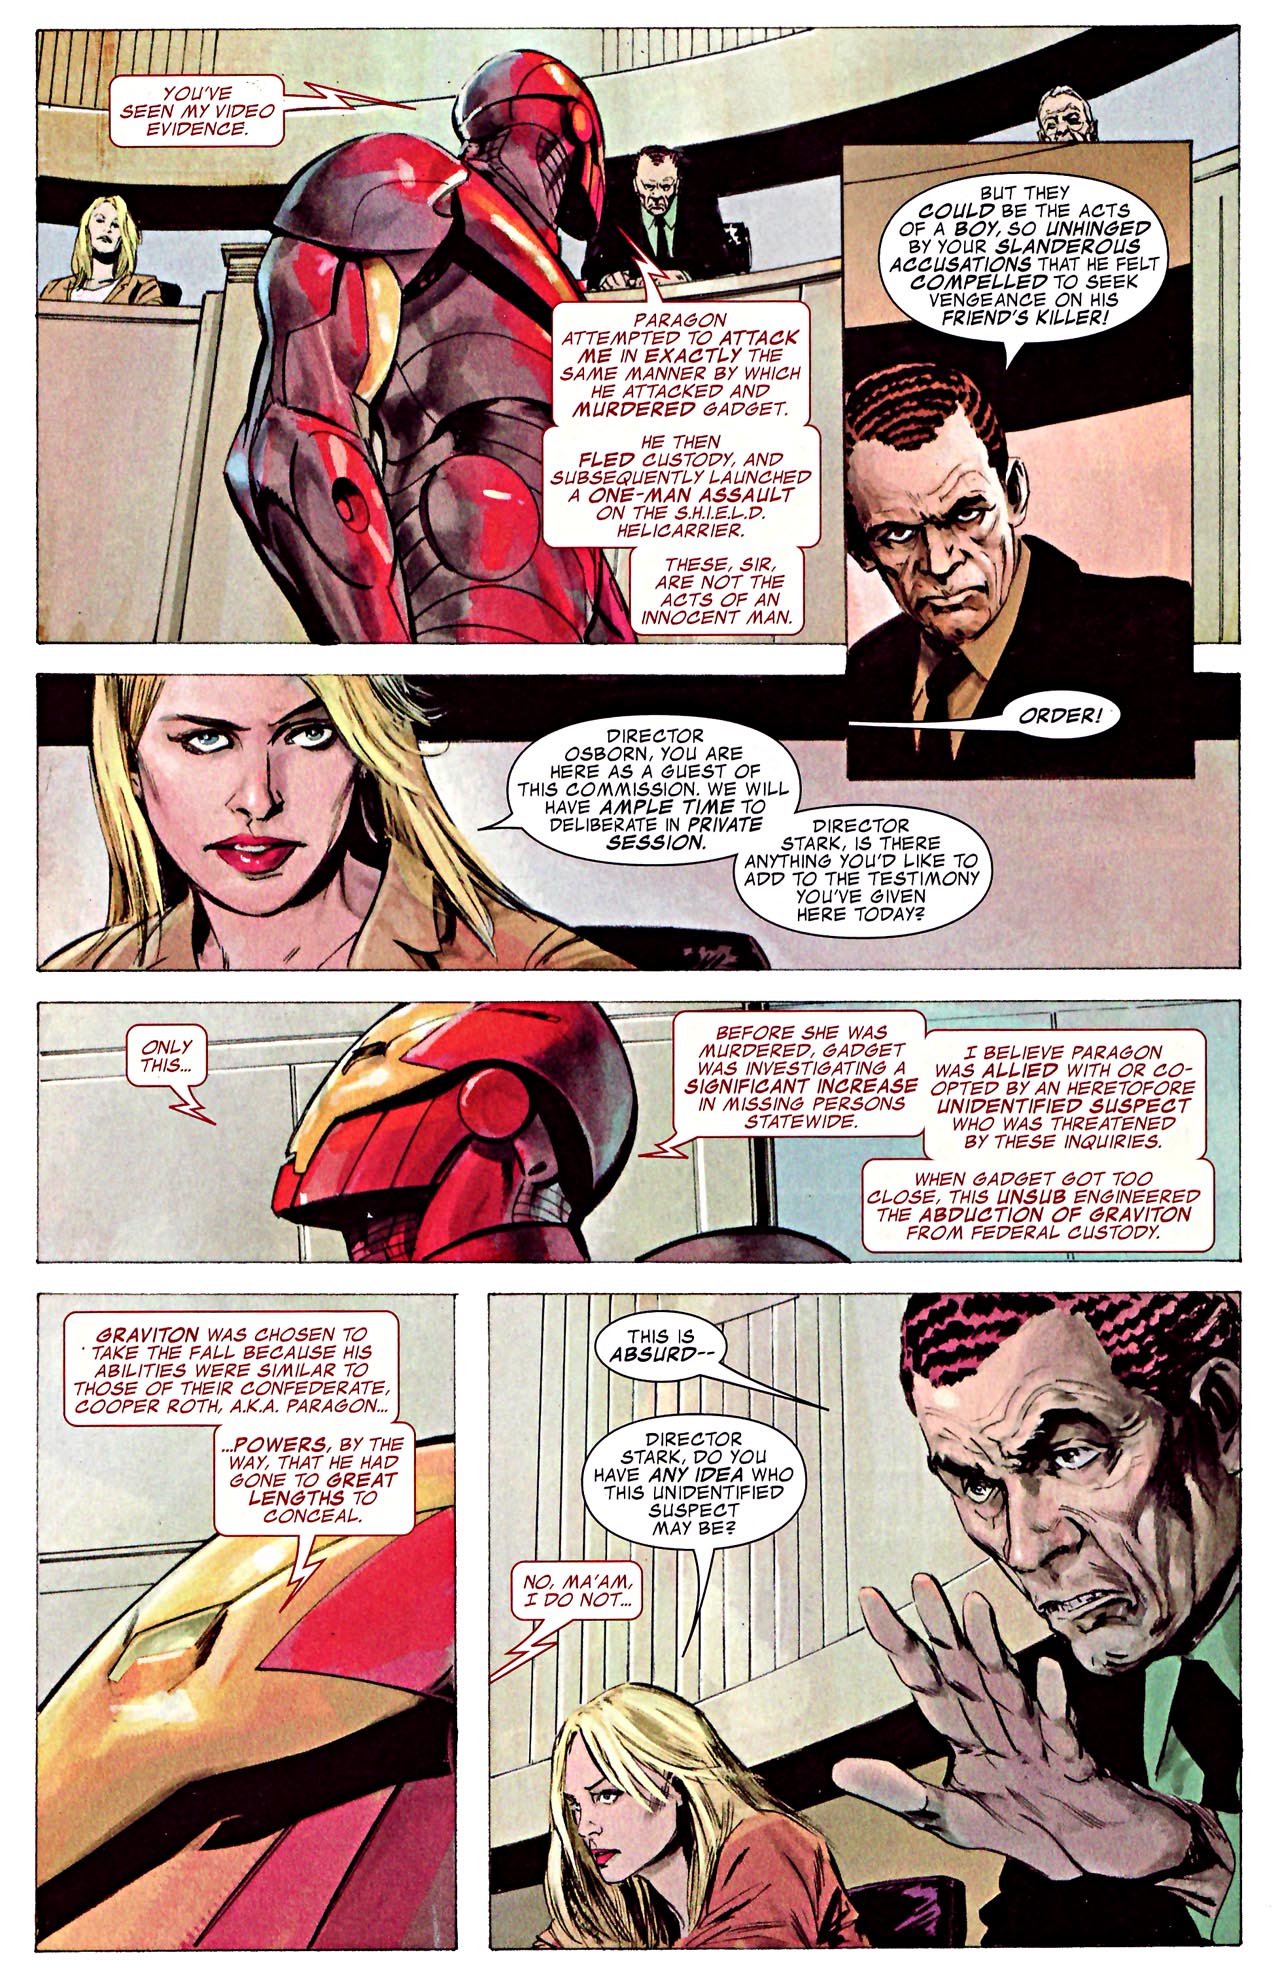 The Invincible Iron Man (2007) 23 Page 13